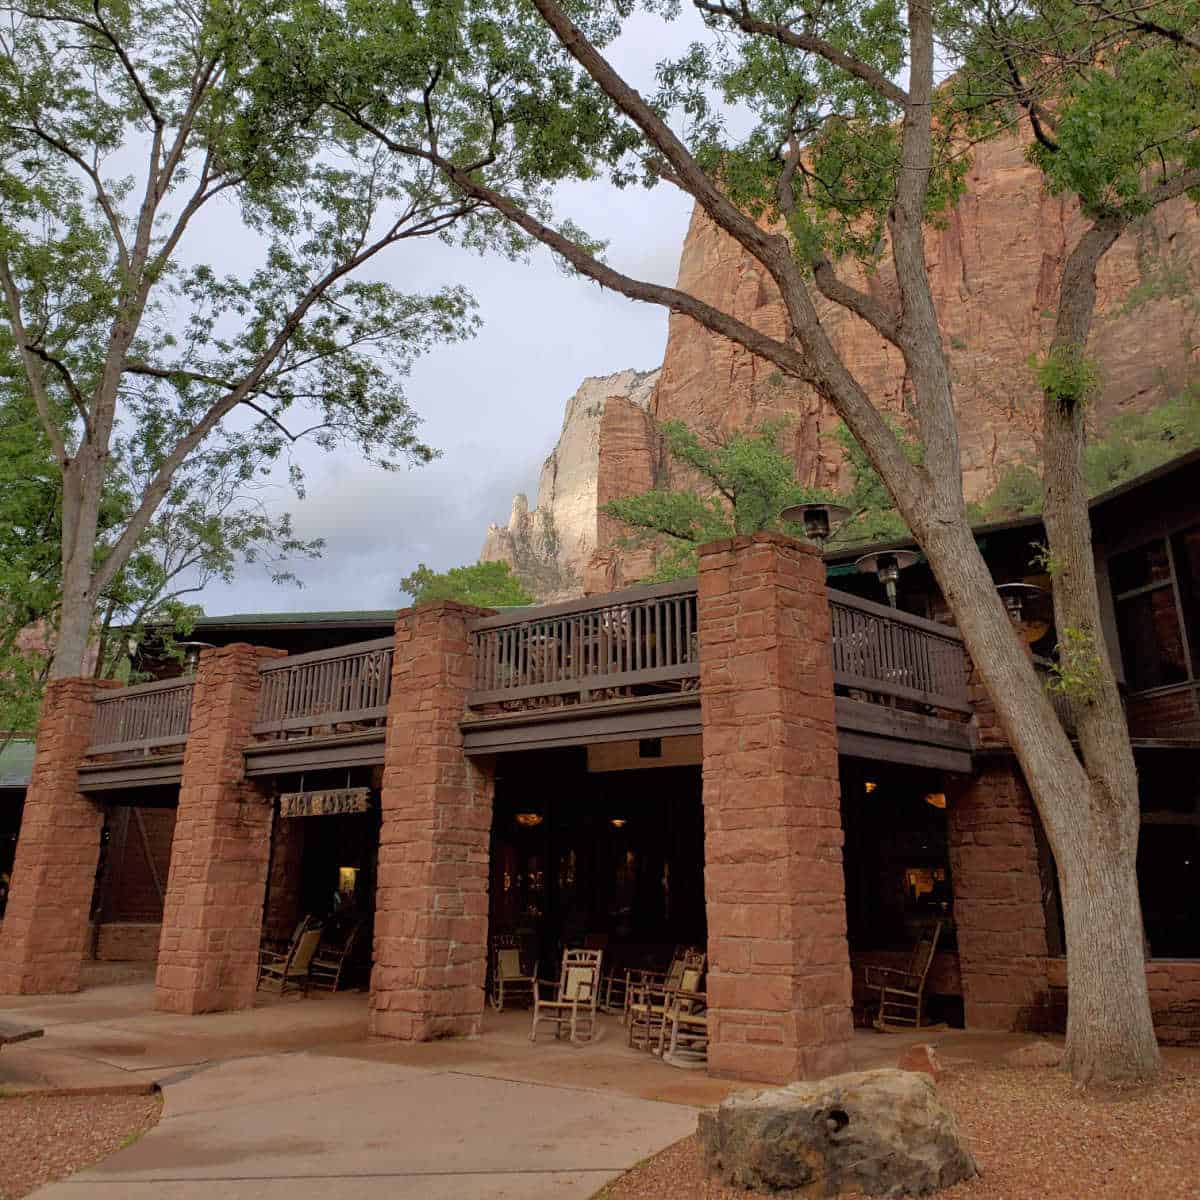 Entrance to the Zion National Park Lodge in Utah